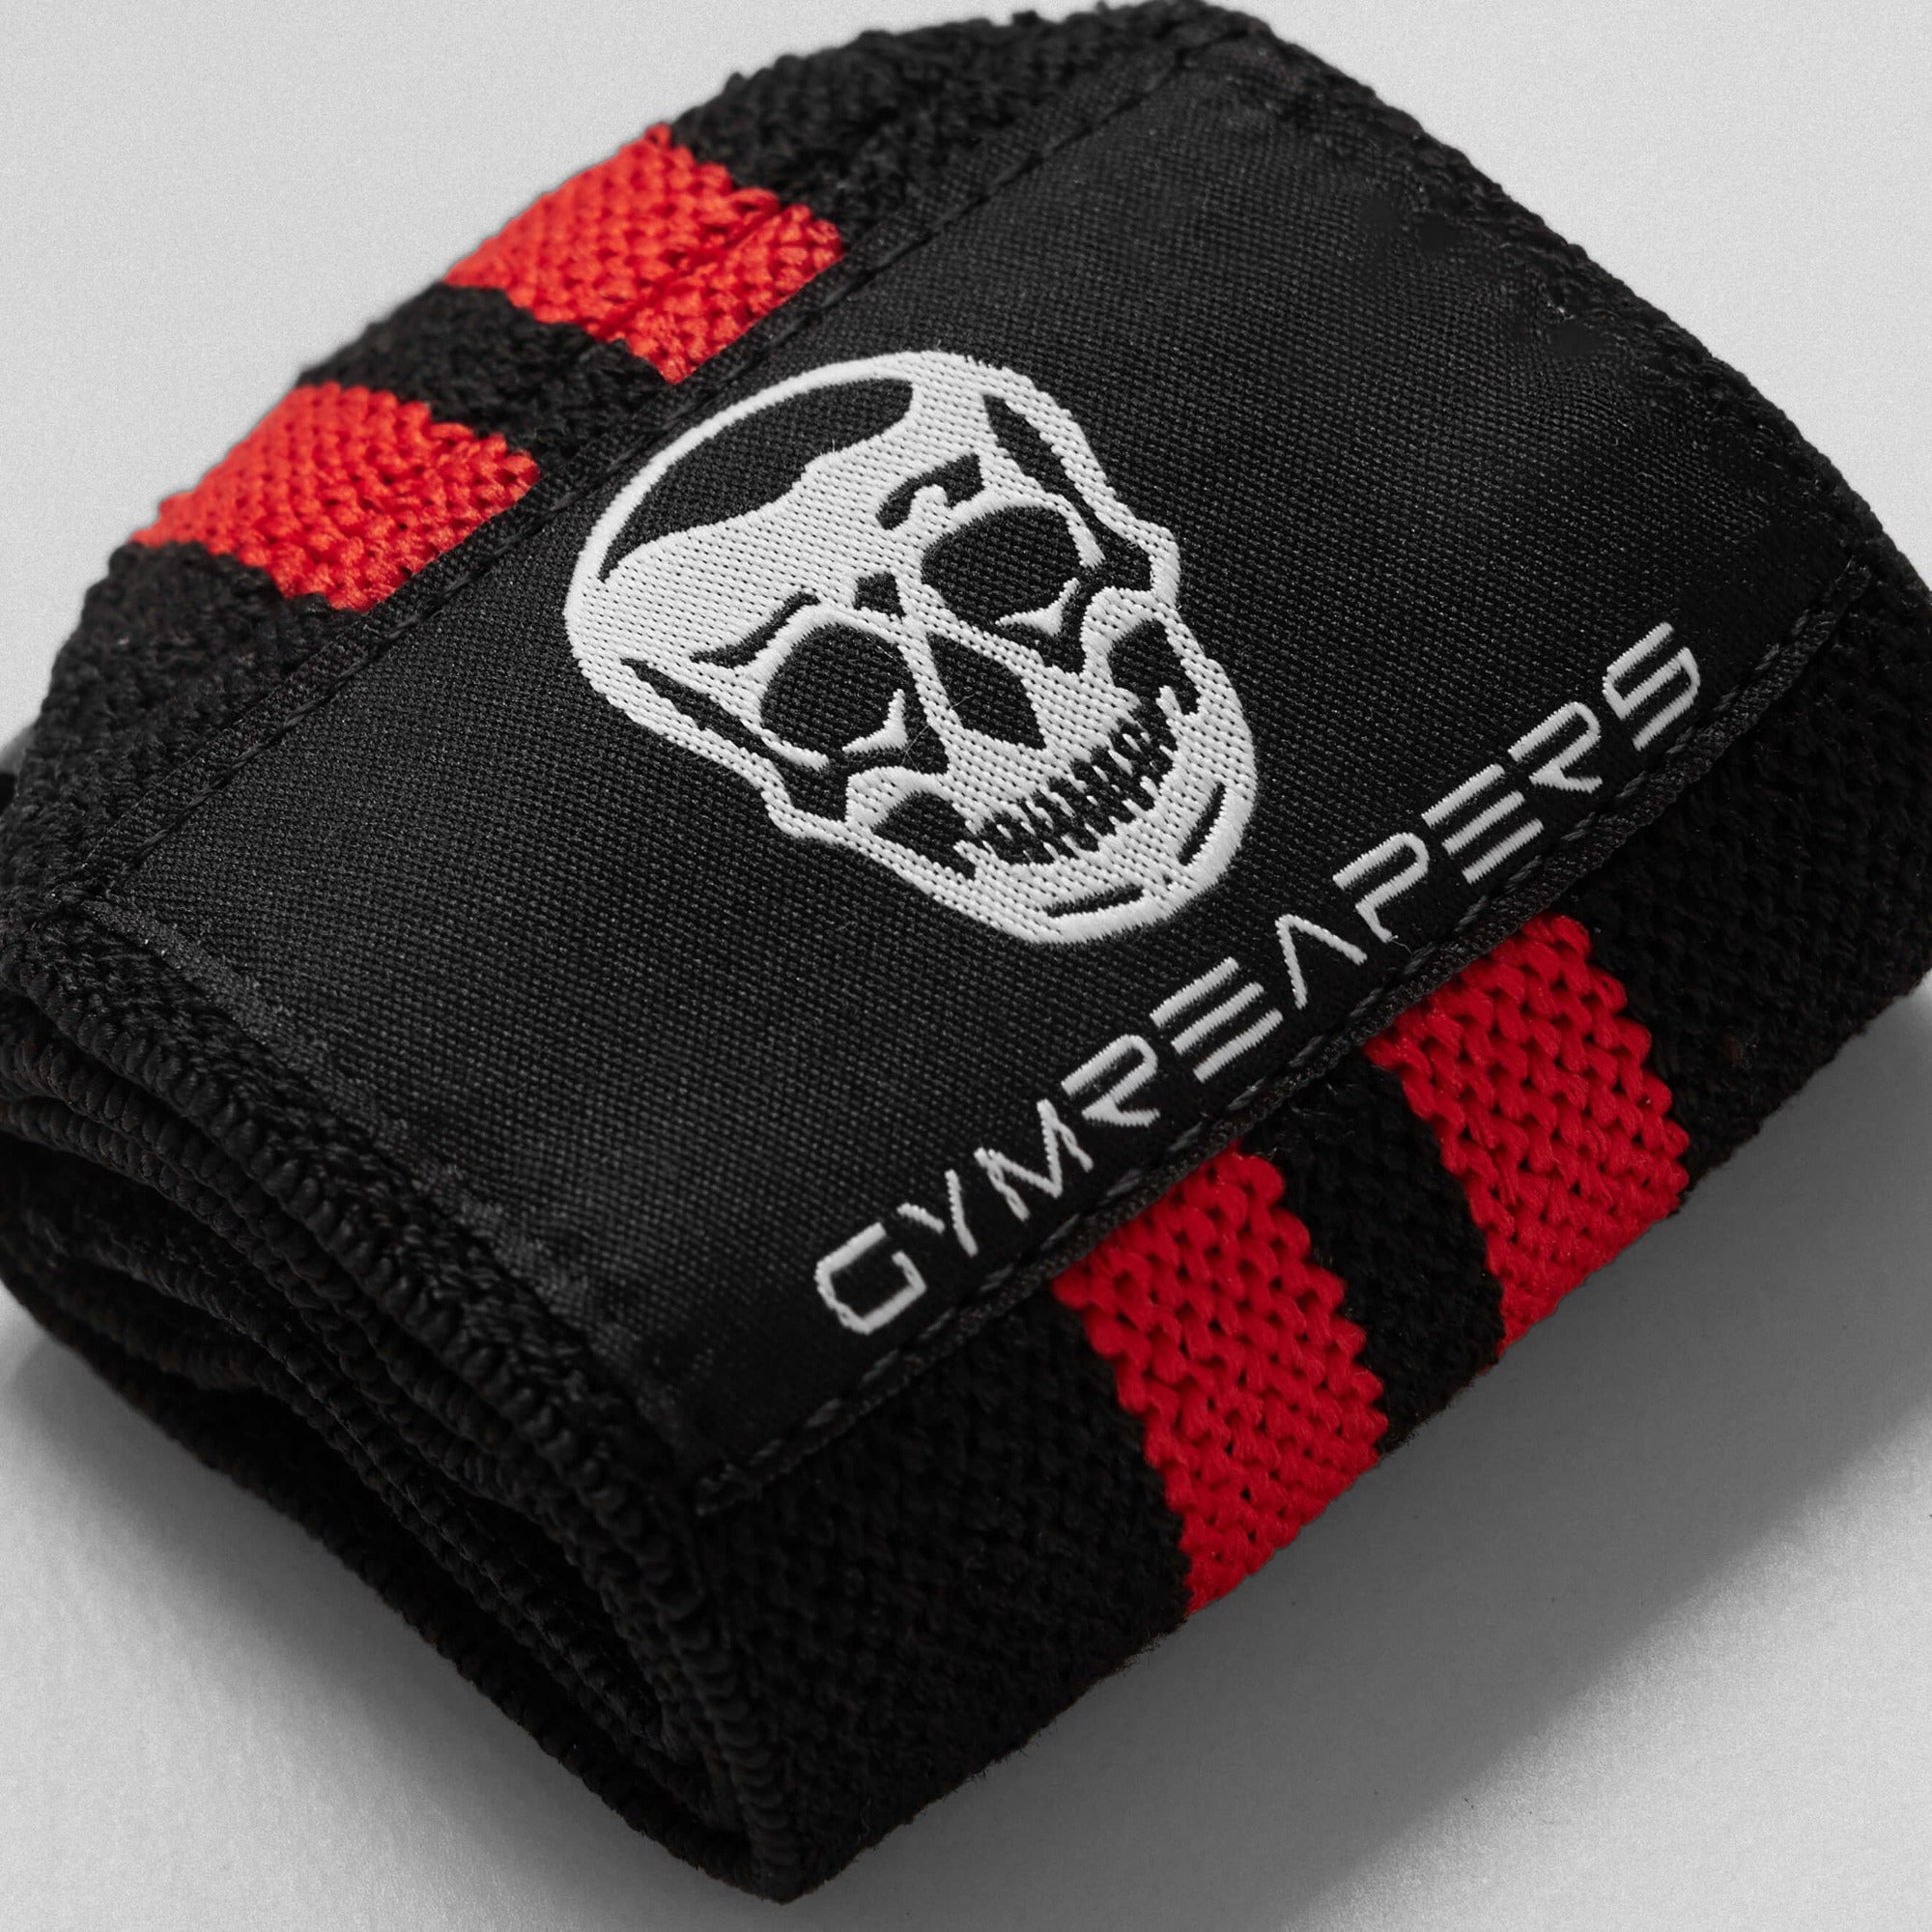 Gymreapers Wrist Wraps - 18 Weightlifting Wrist Support - Red